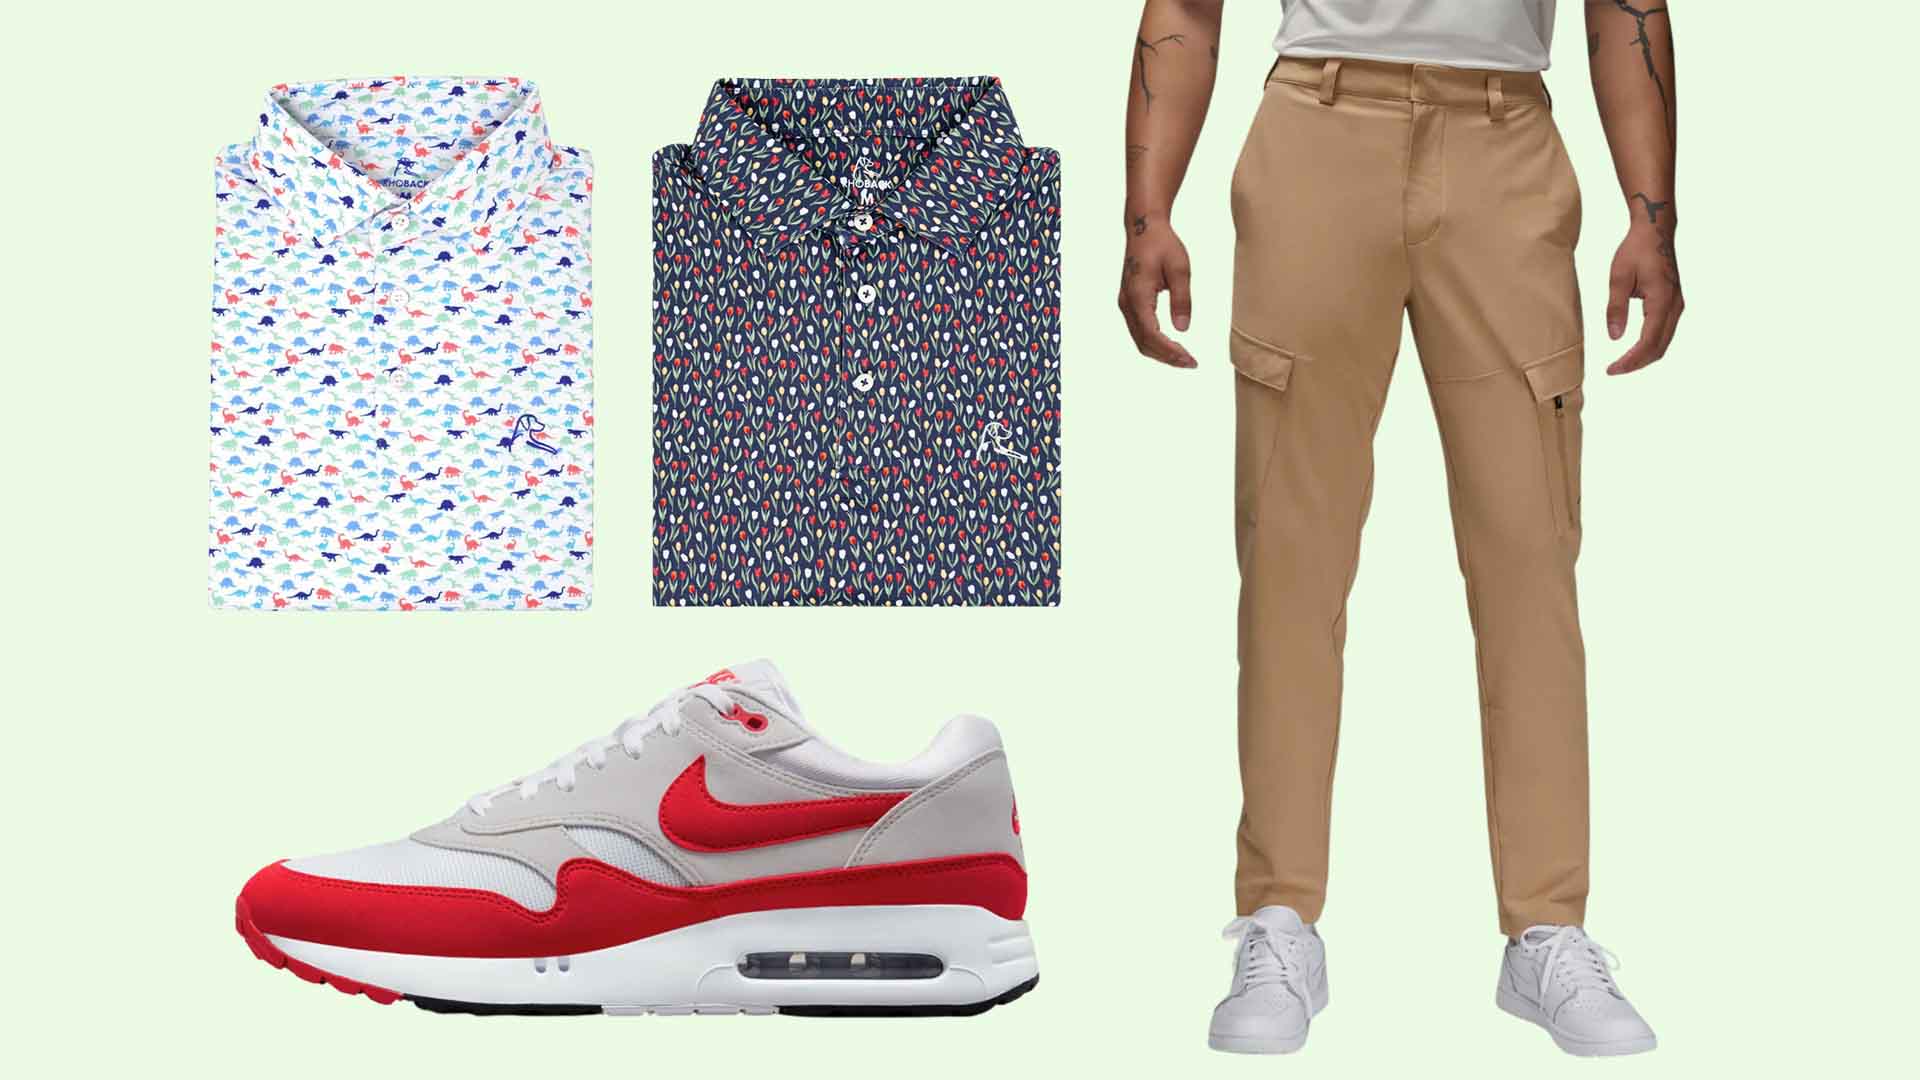 These 3 stylish golf outfits for men are perfect for summer rounds